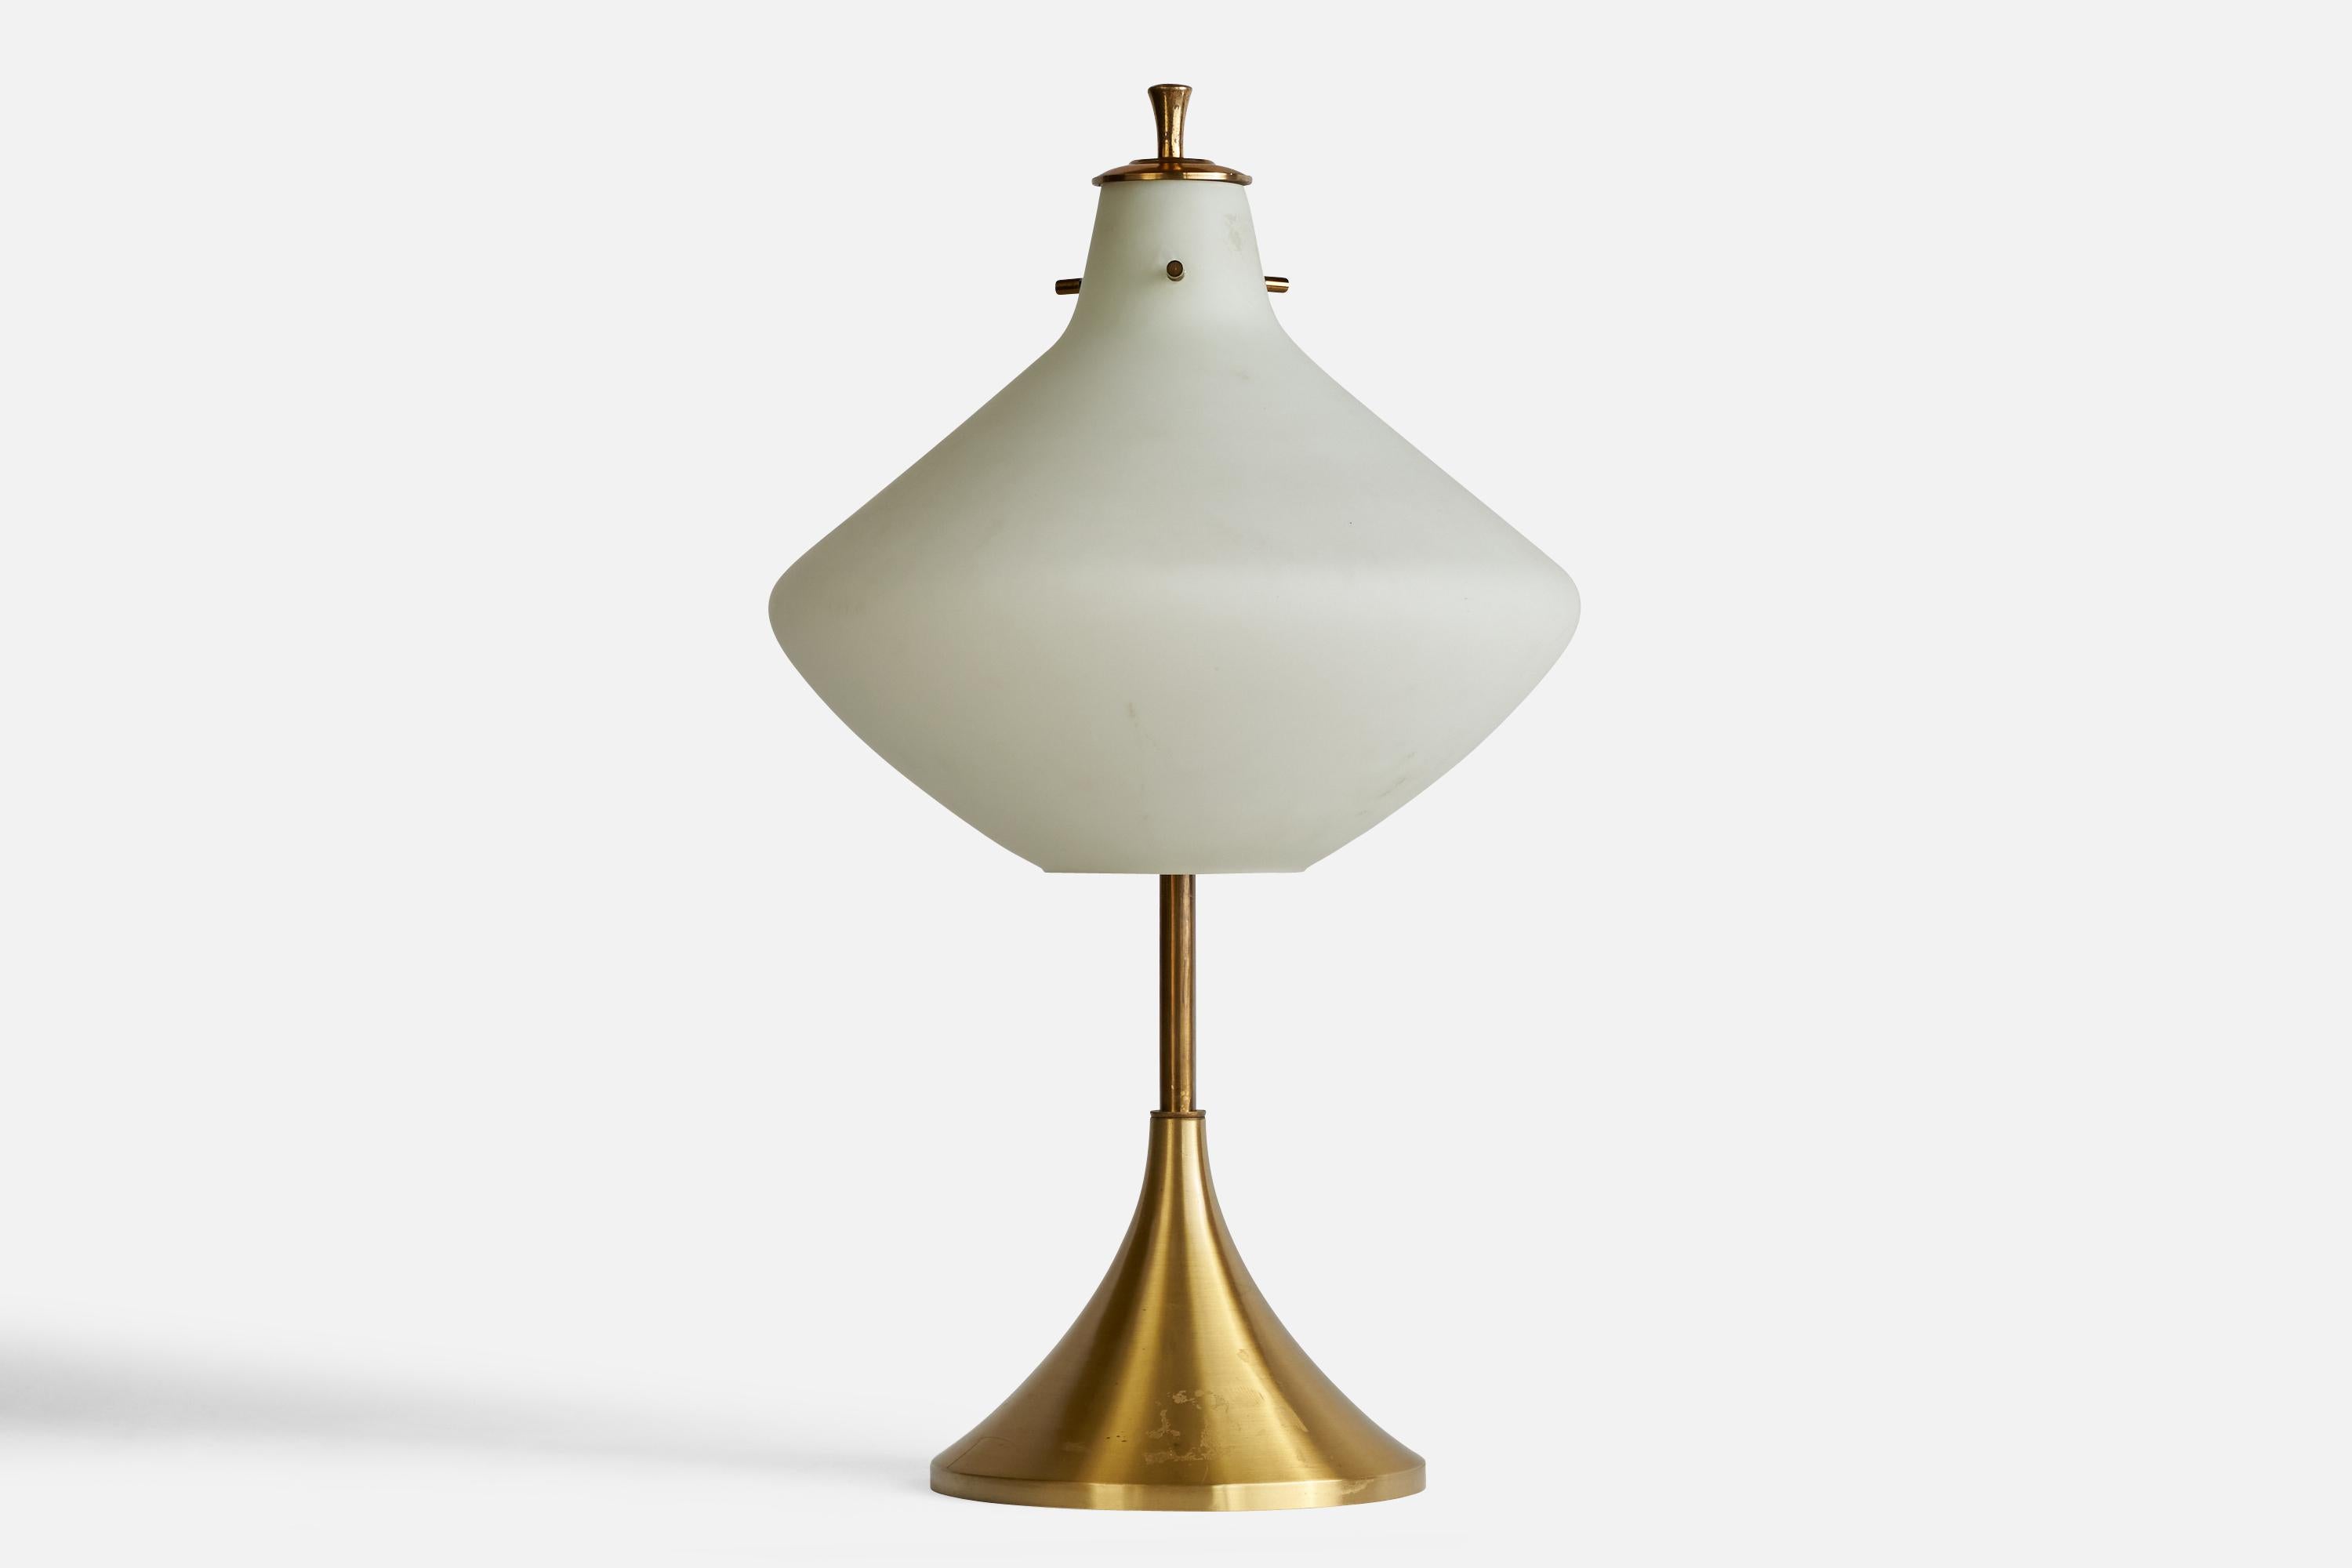 A brass and opaline glass table lamp designed and produced in Italy, 1950s.

Overall Dimensions (inches): 23” H x 13” Diameter 
Bulb Specifications: E-14 Bulb
Number of Sockets: 2
All lighting will be converted for US usage. We is unable to confirm